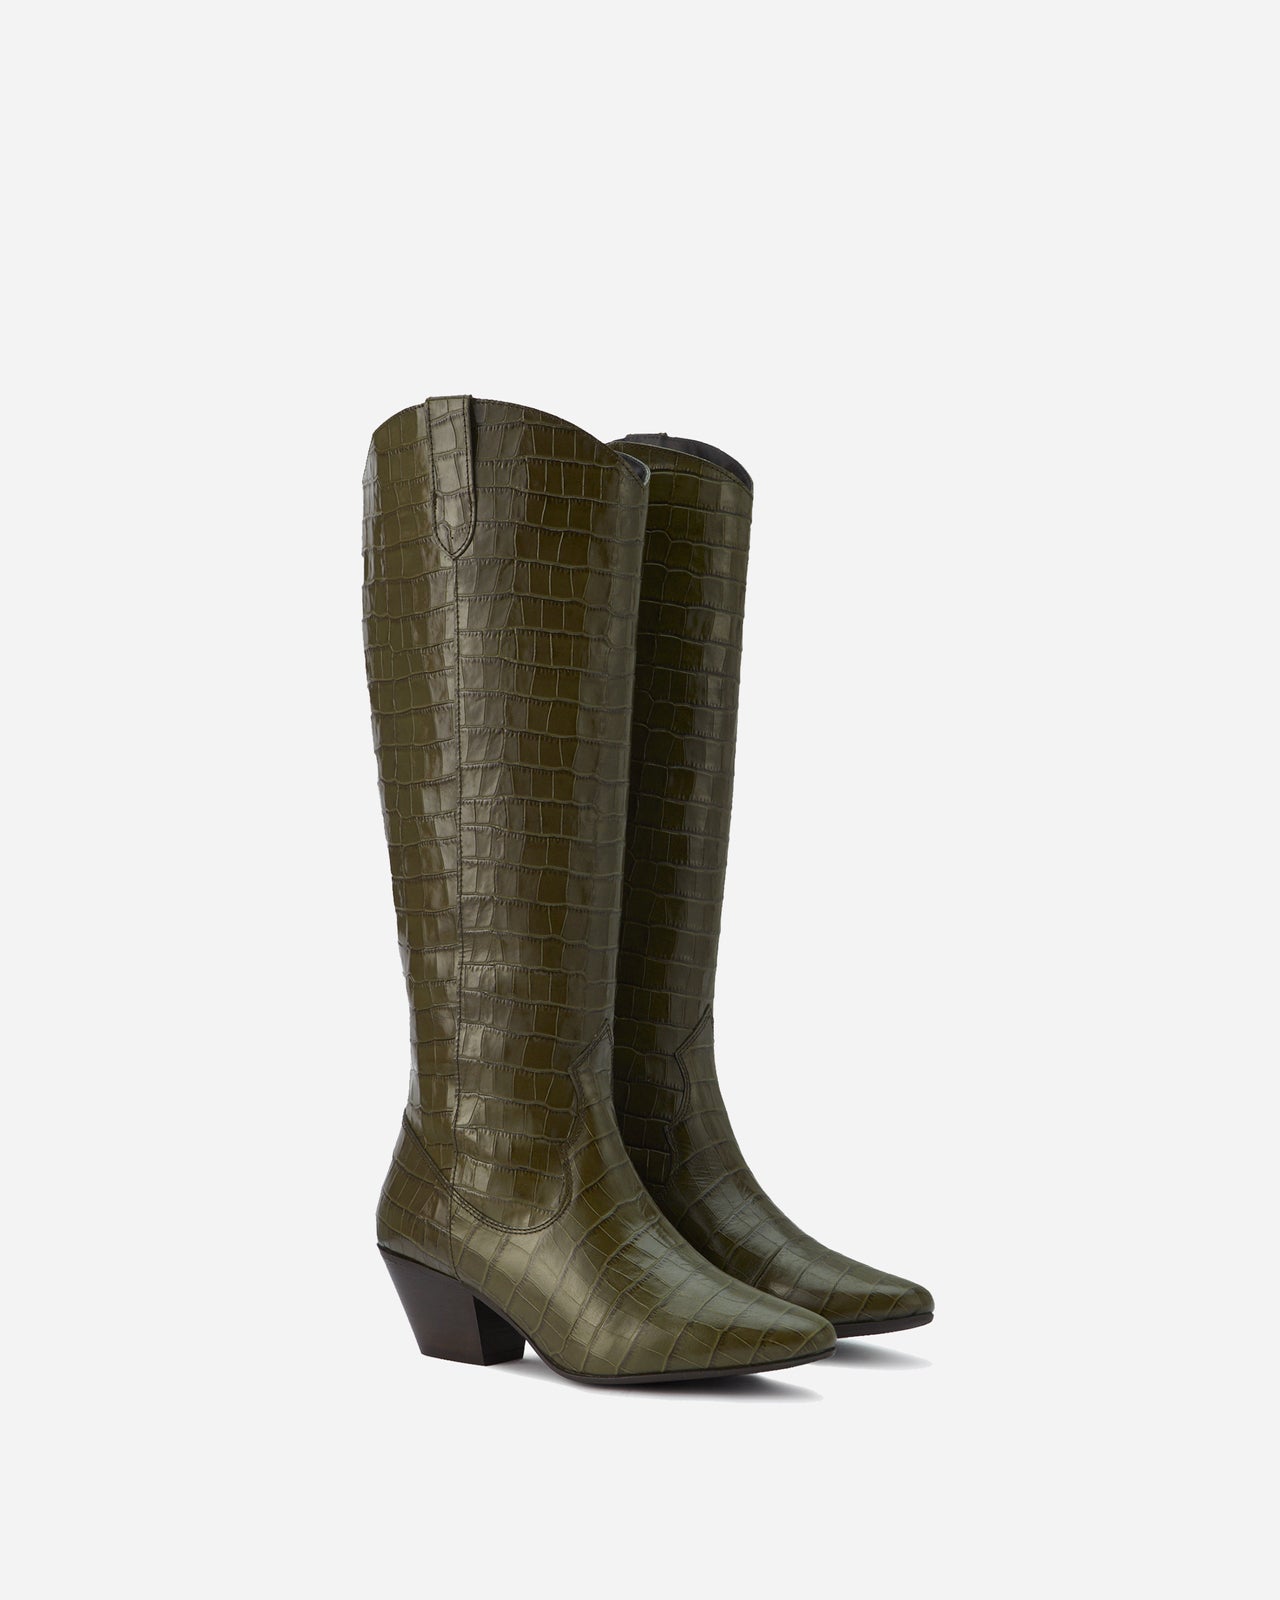 knee high leather green croc western style cowboy boots